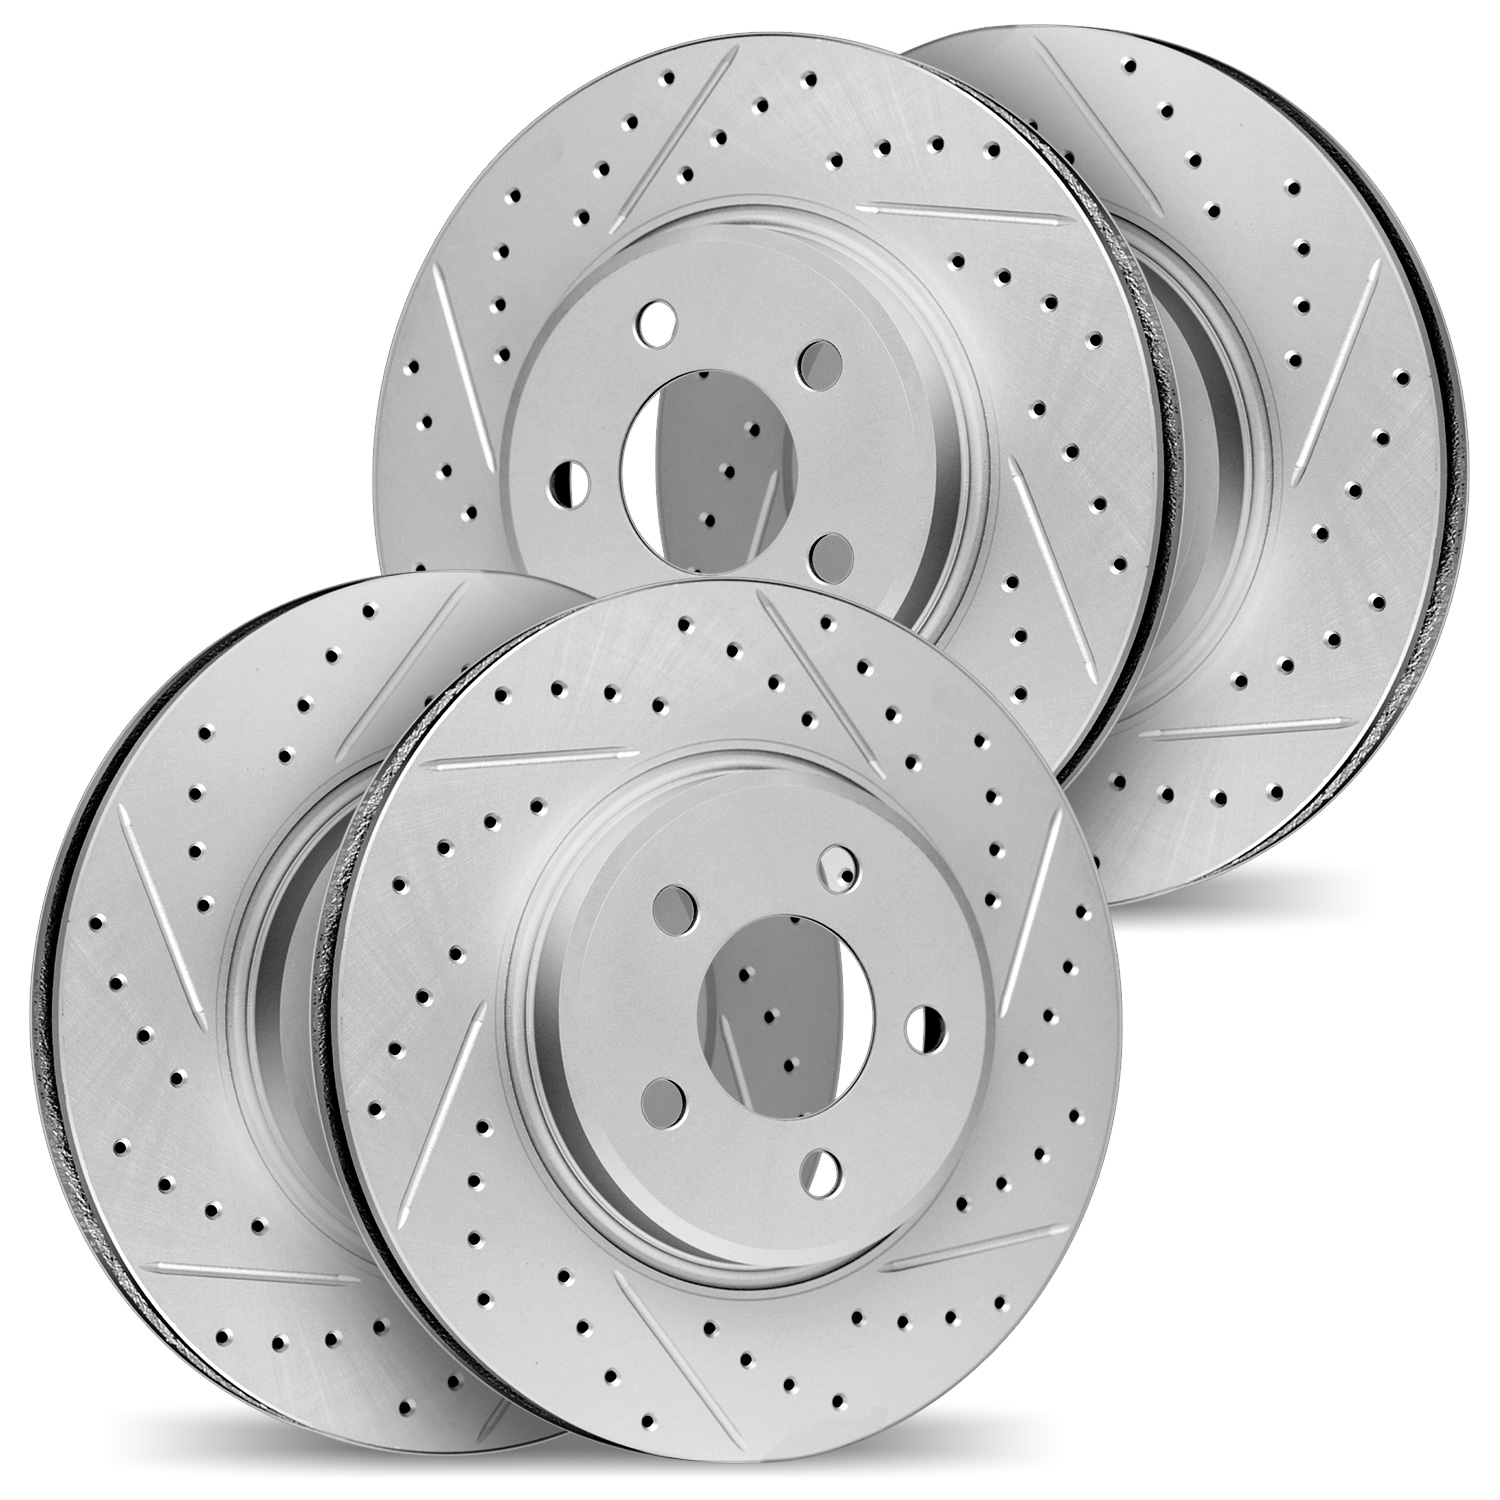 2004-73039 Geoperformance Drilled/Slotted Brake Rotors, 2004-2009 Audi/Volkswagen, Position: Front and Rear